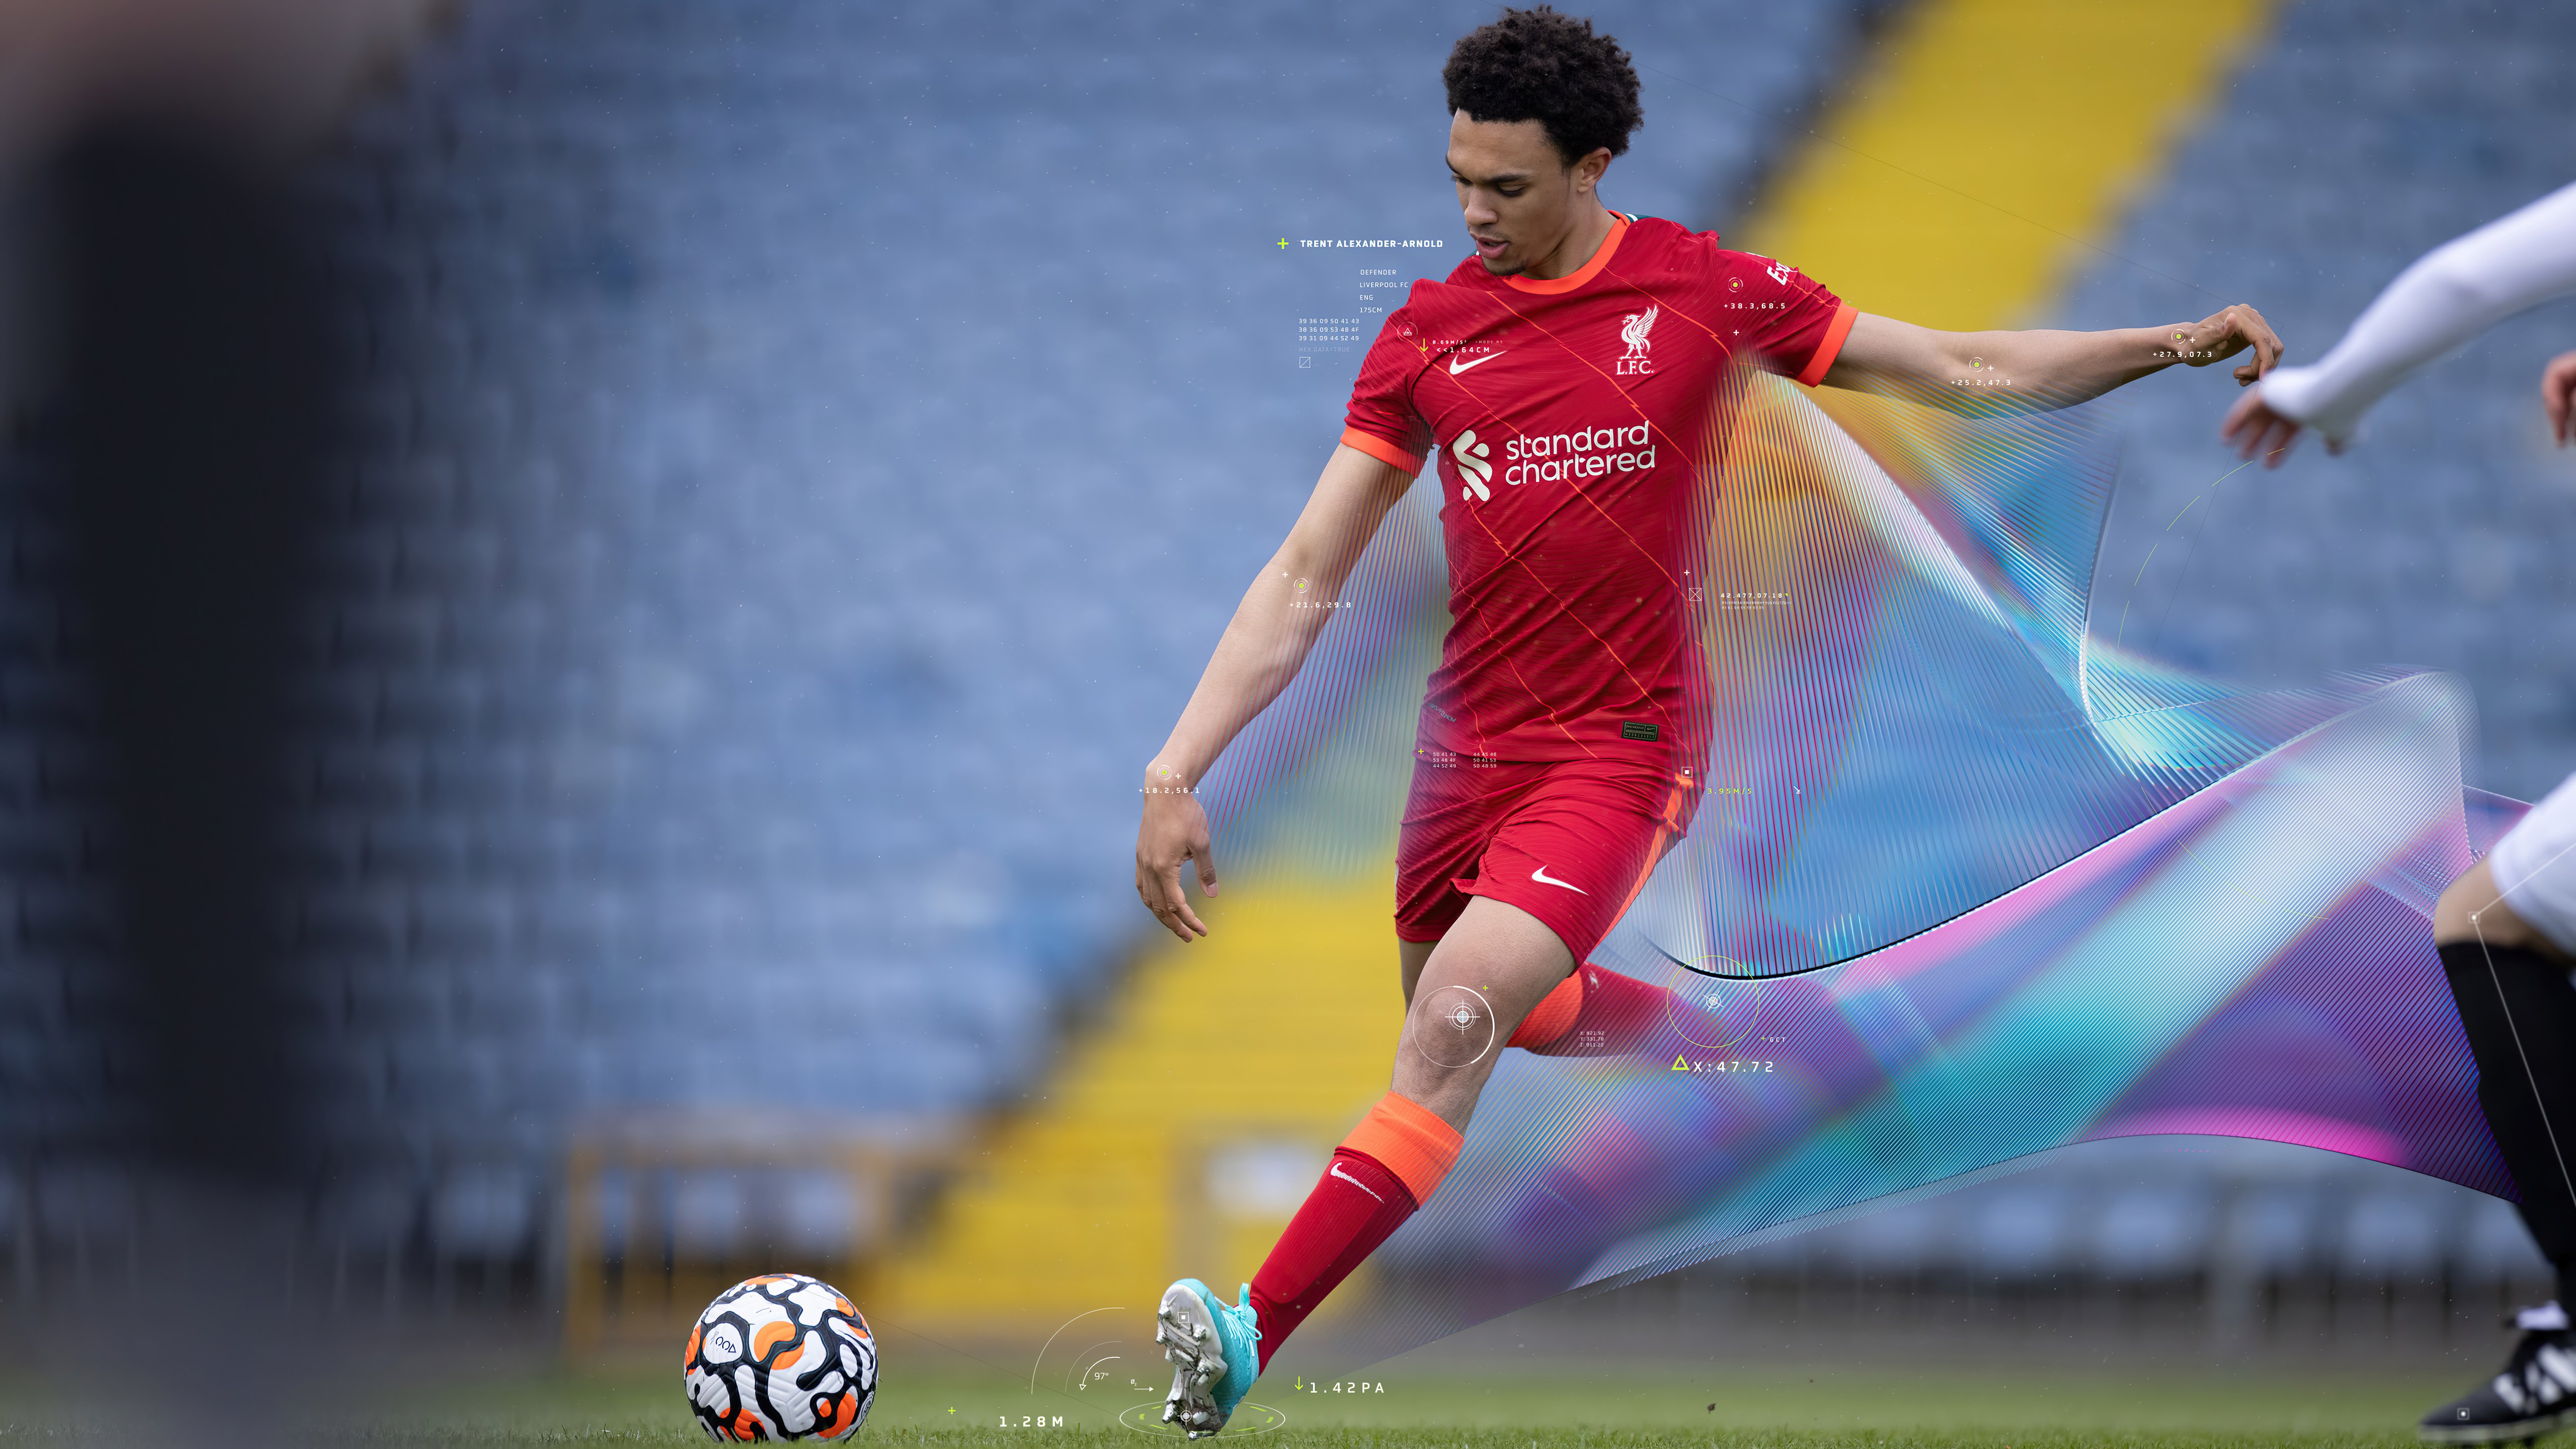 Alexander Arnold In Fifa HD Games, 4k Wallpaper, Image, Background, Photo and Picture